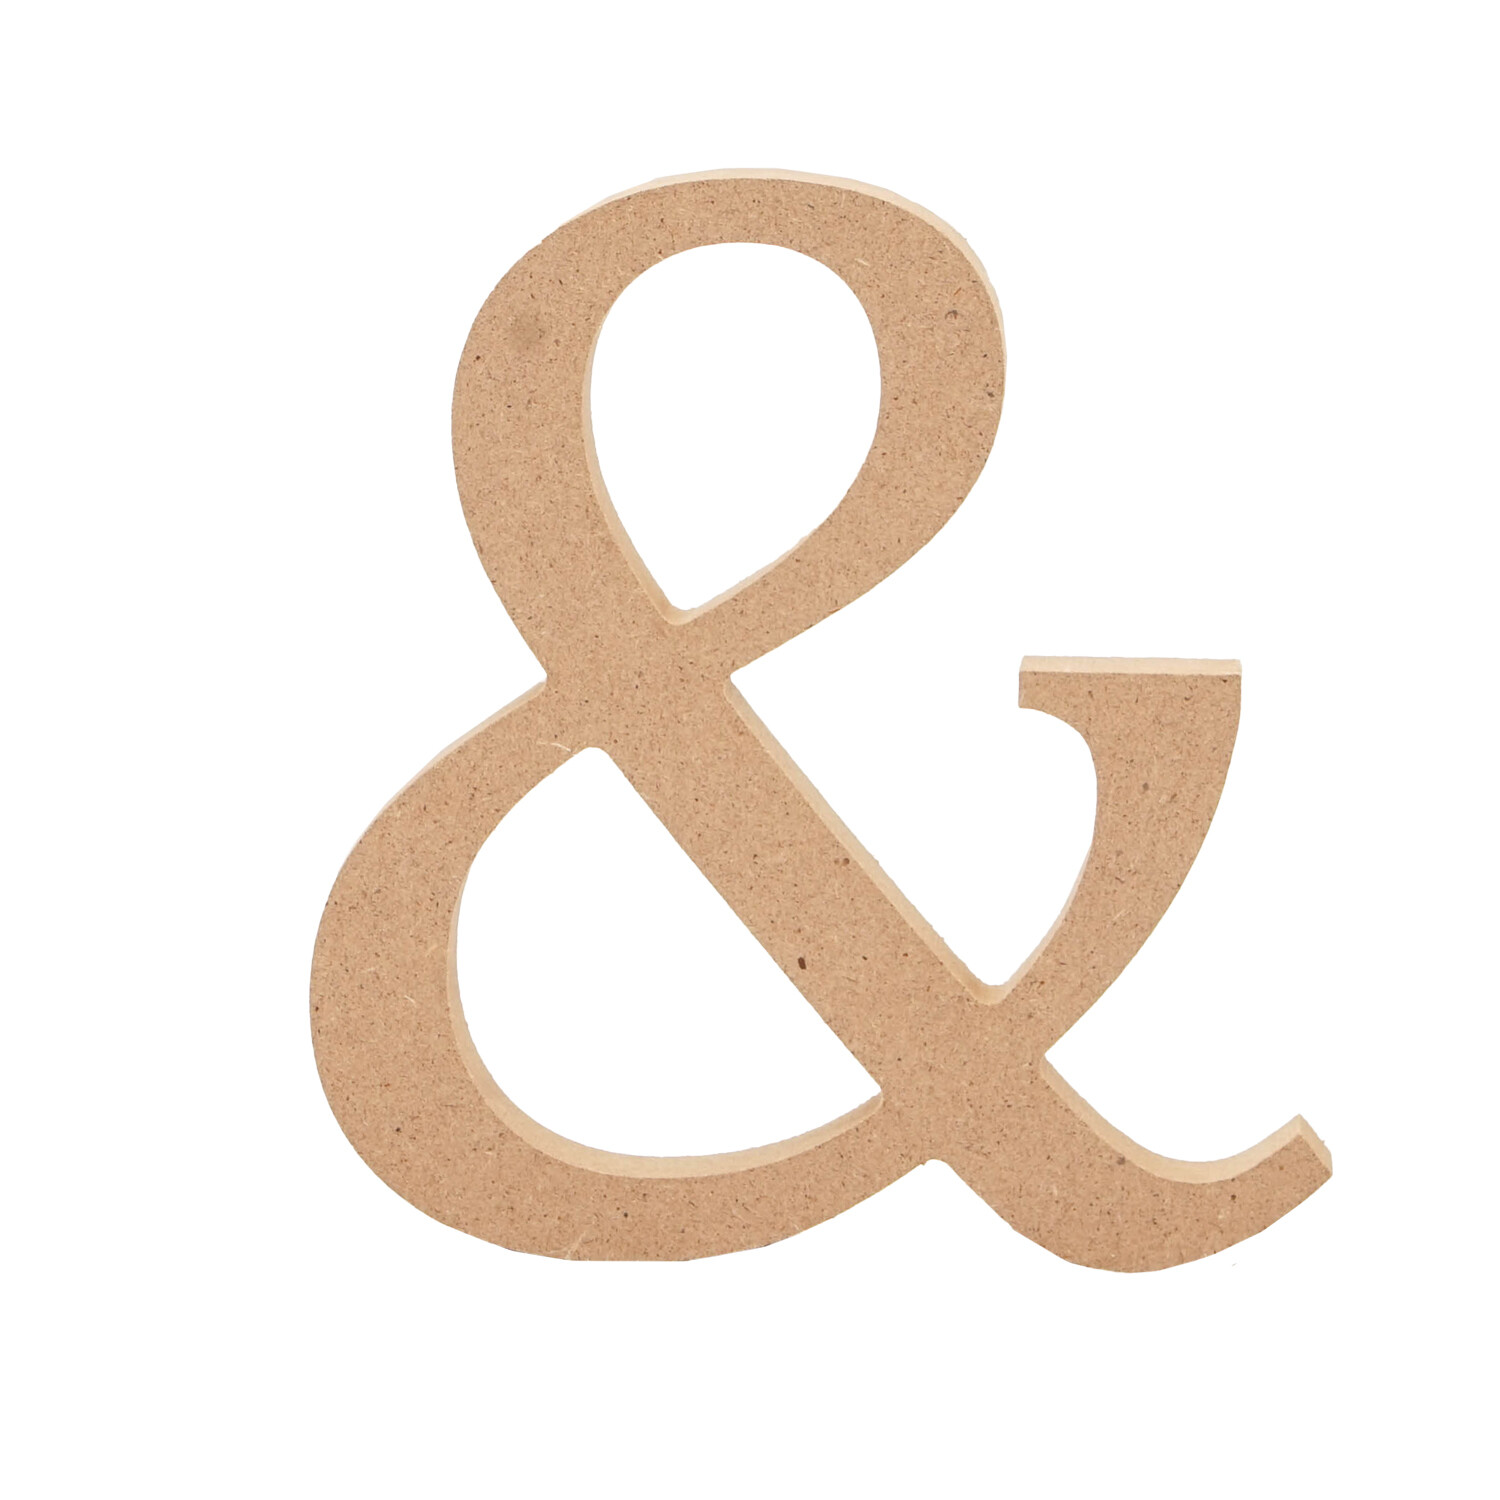 Mr and Mrs MDF Sign Image 3